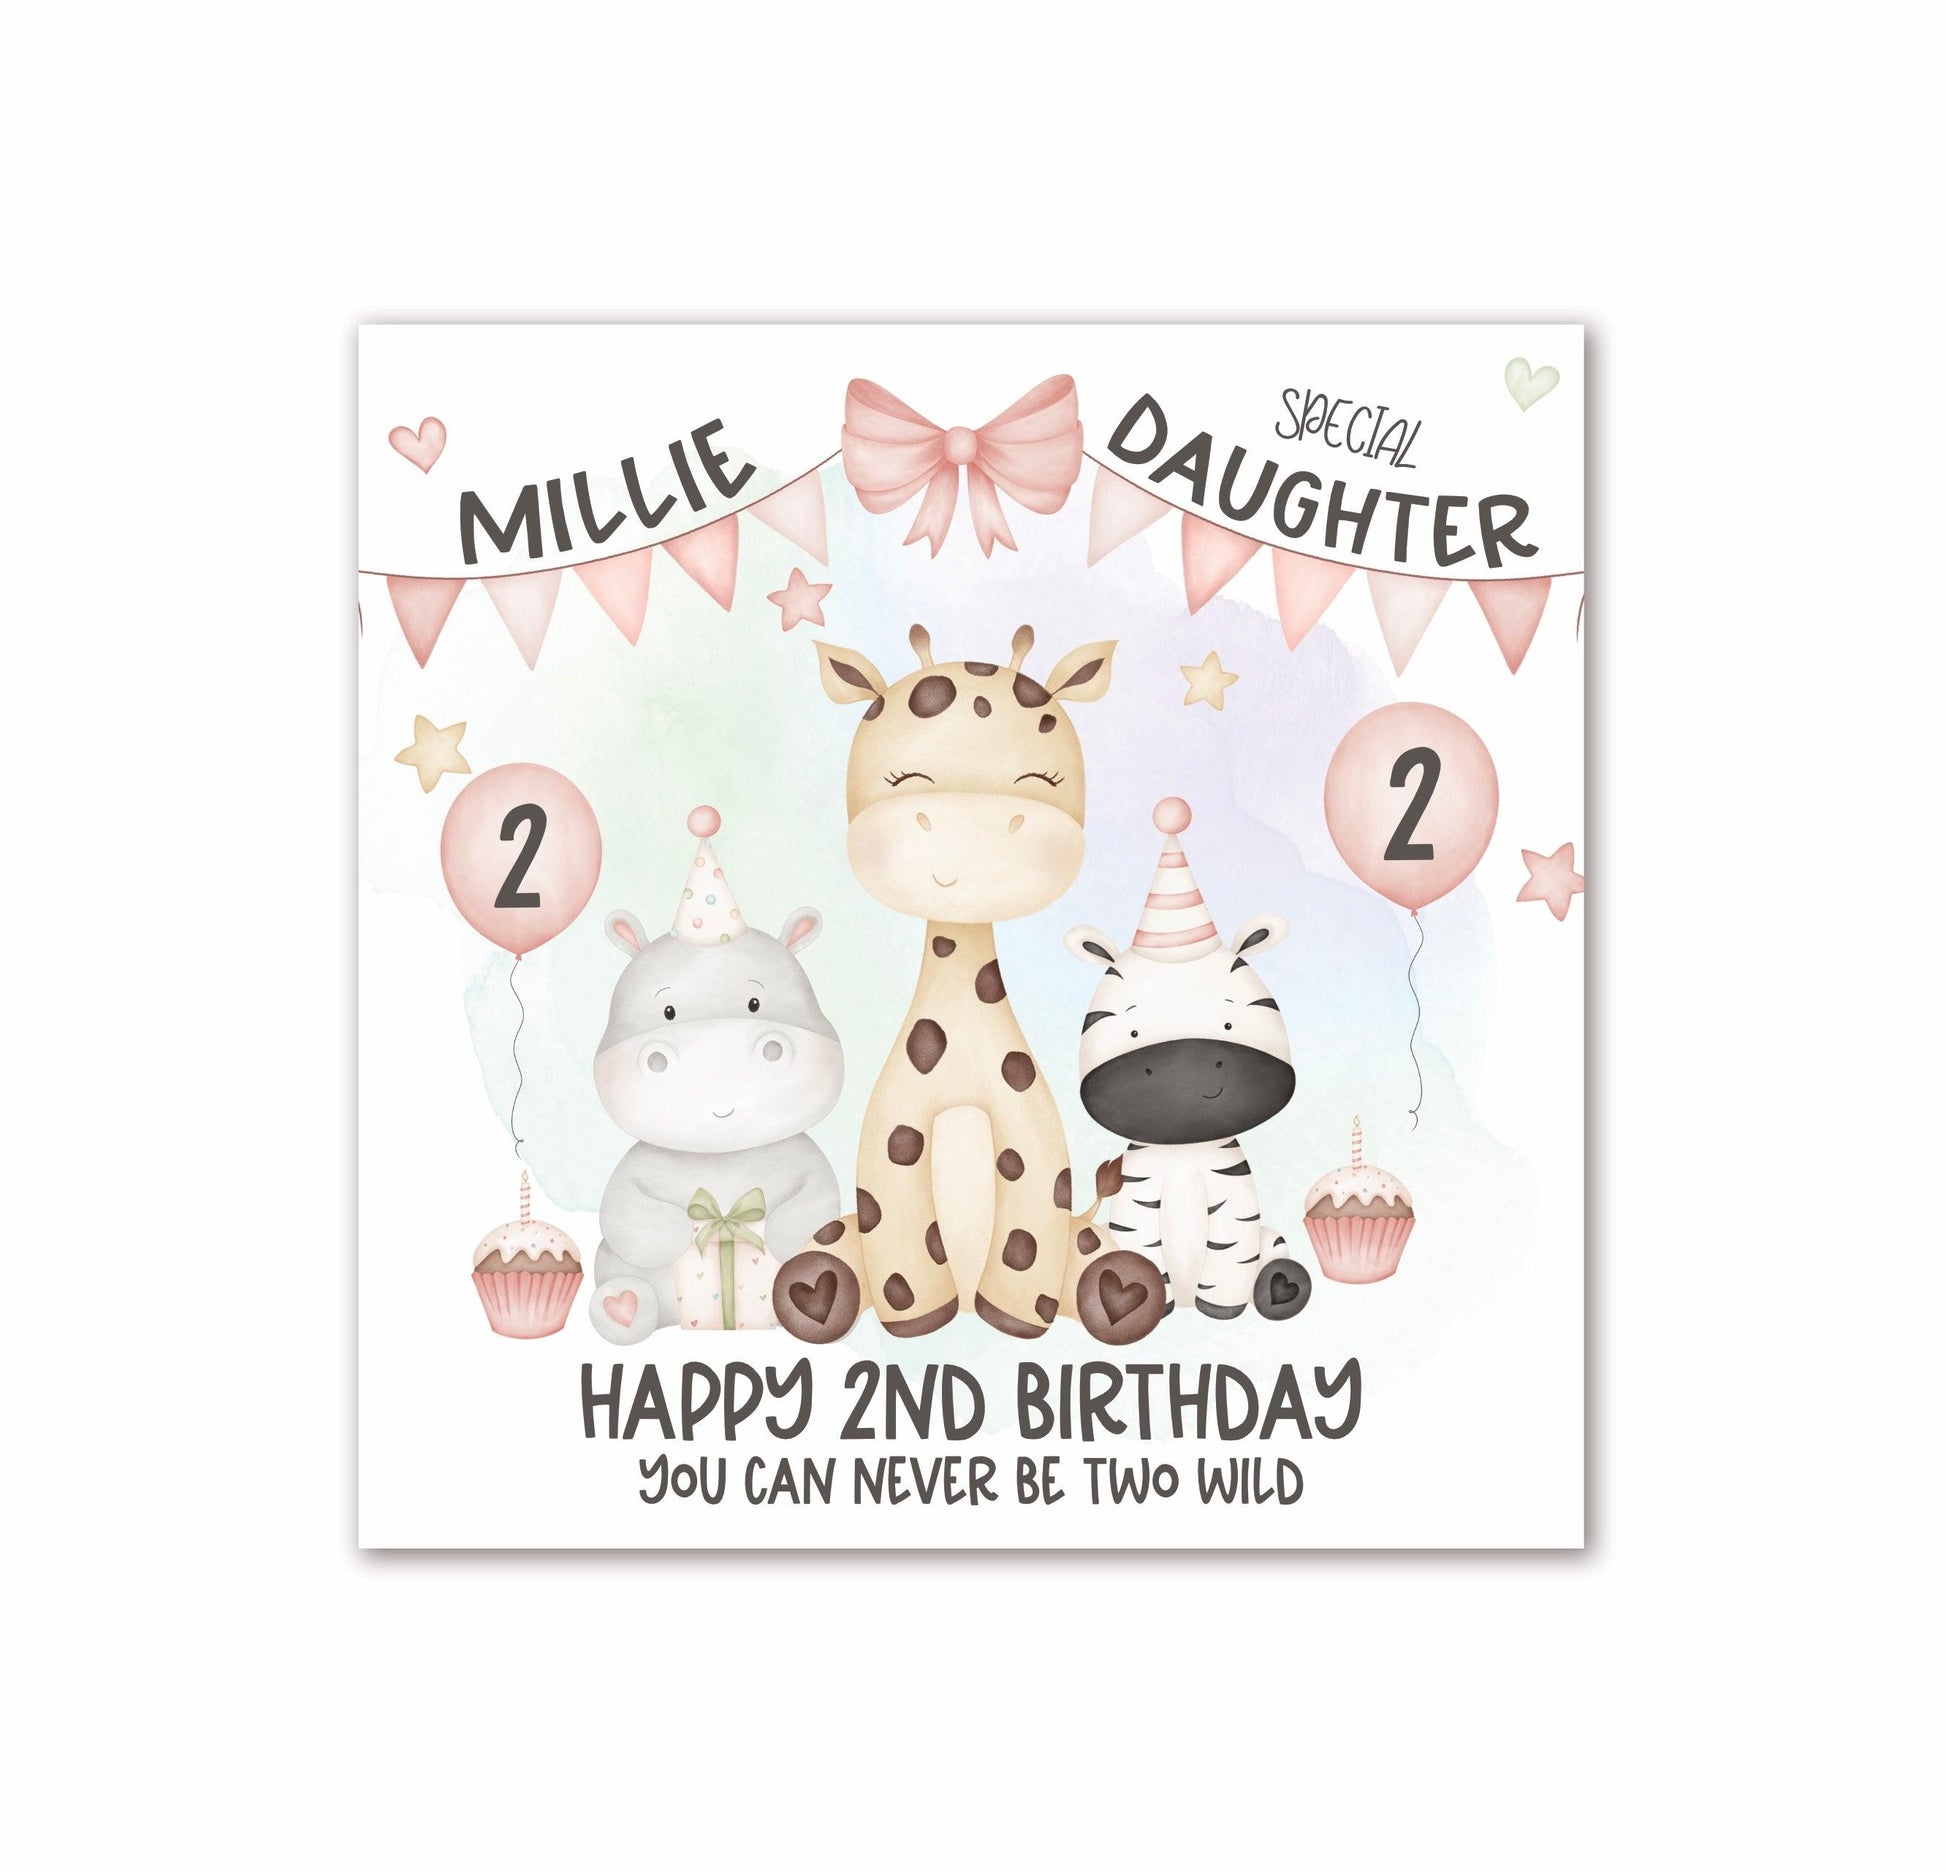 Safari Animals 2nd Birthday Card in PINK, Personalised with a Name, Special DAUGHTER, Happy 2nd Birthday Card, YOU CAN NEVER BE TWO WILD, Giraffe, Rhino & Zebra [Oliver Rose Designs]